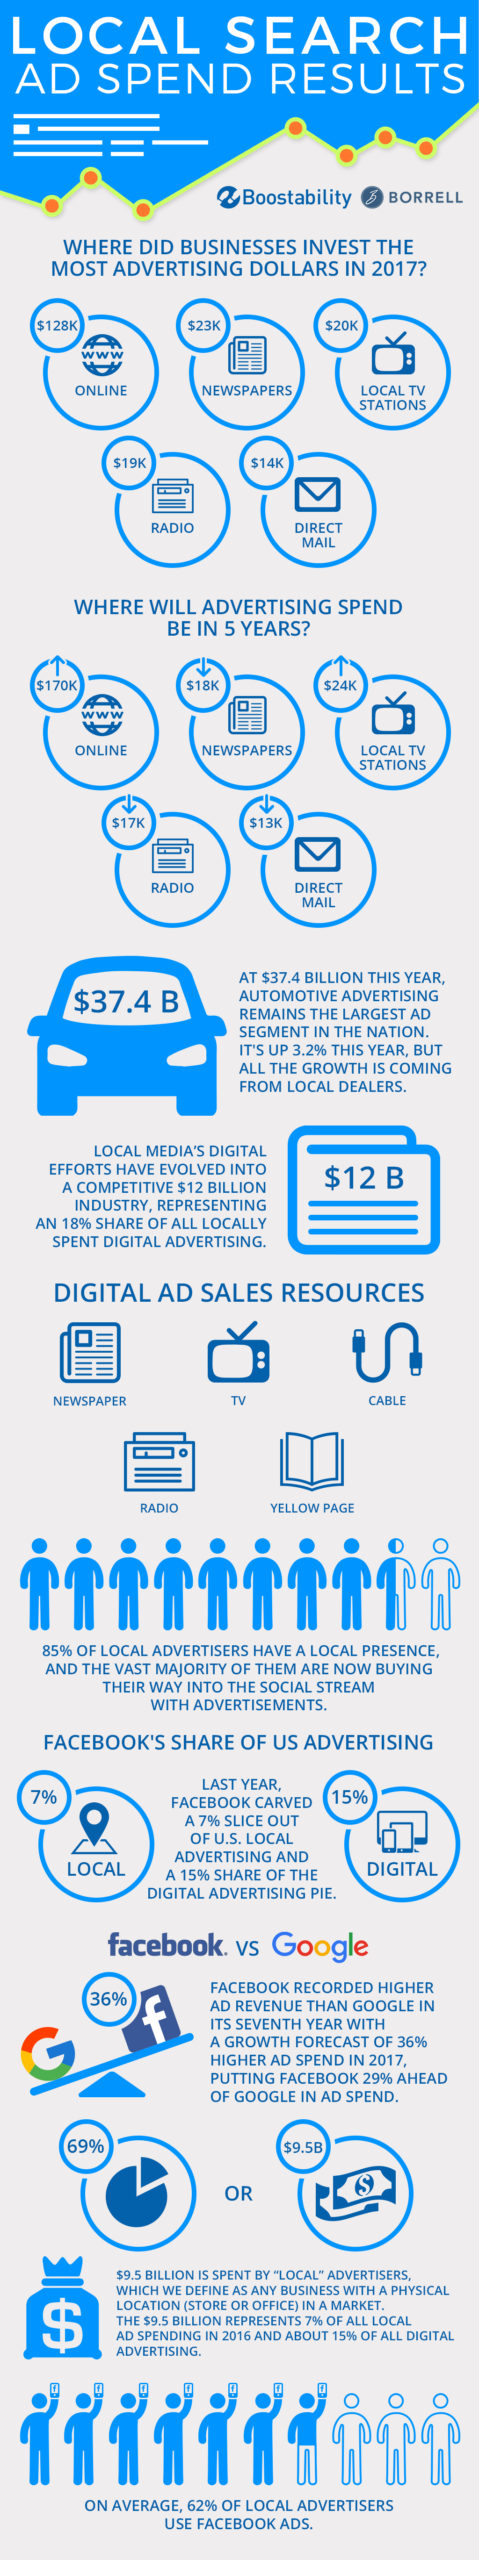 Local Search Infographic: Ad Spend Results